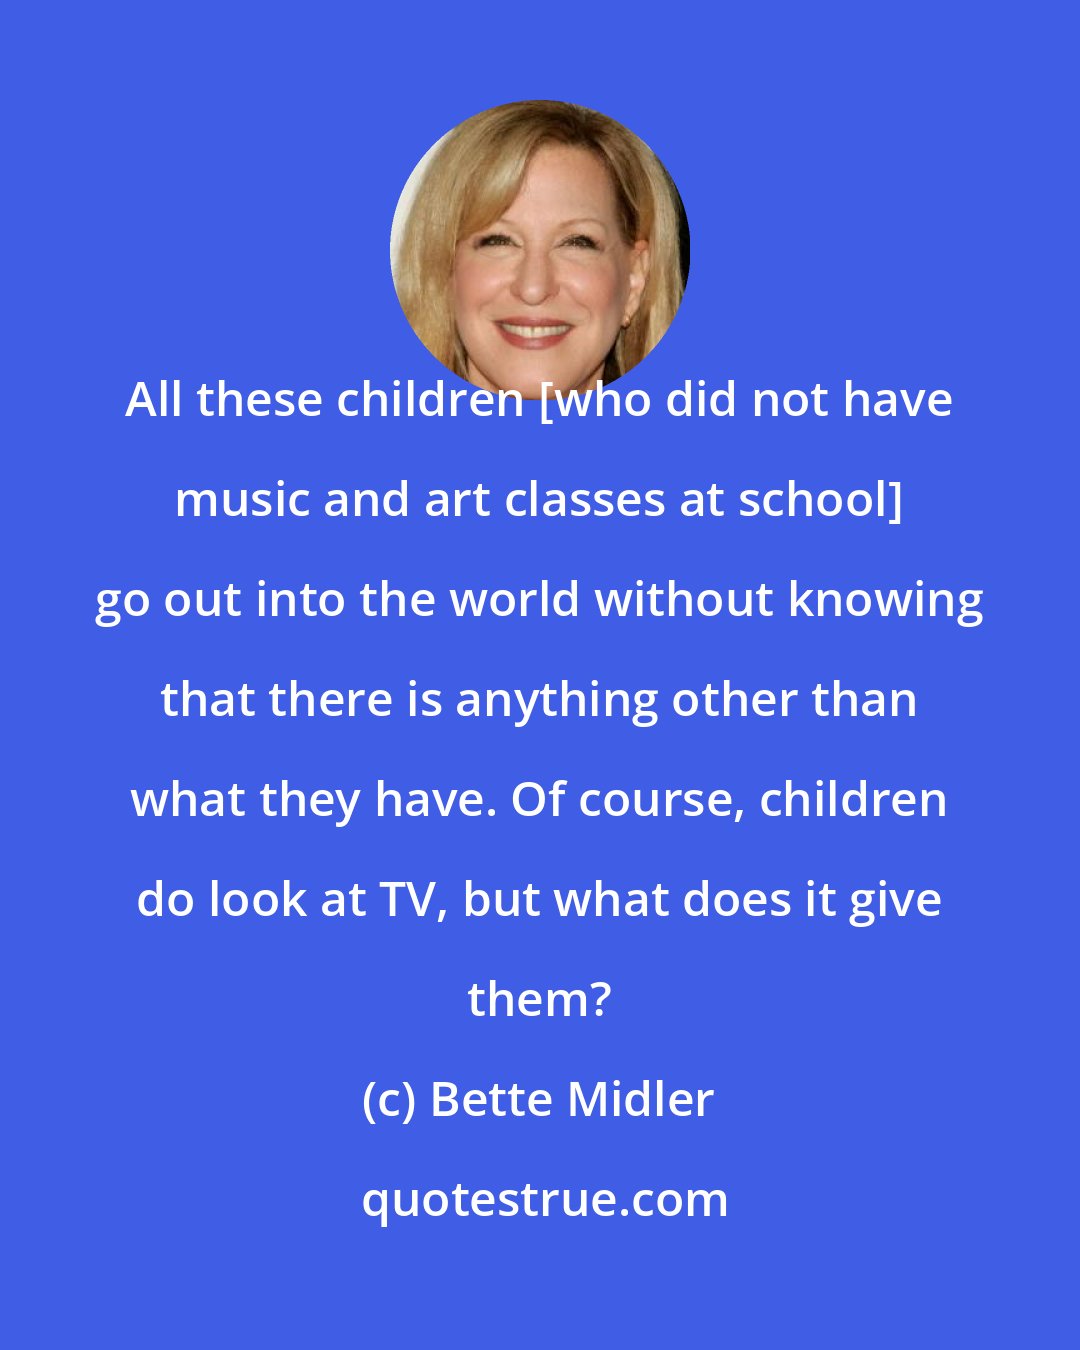 Bette Midler: All these children [who did not have music and art classes at school] go out into the world without knowing that there is anything other than what they have. Of course, children do look at TV, but what does it give them?